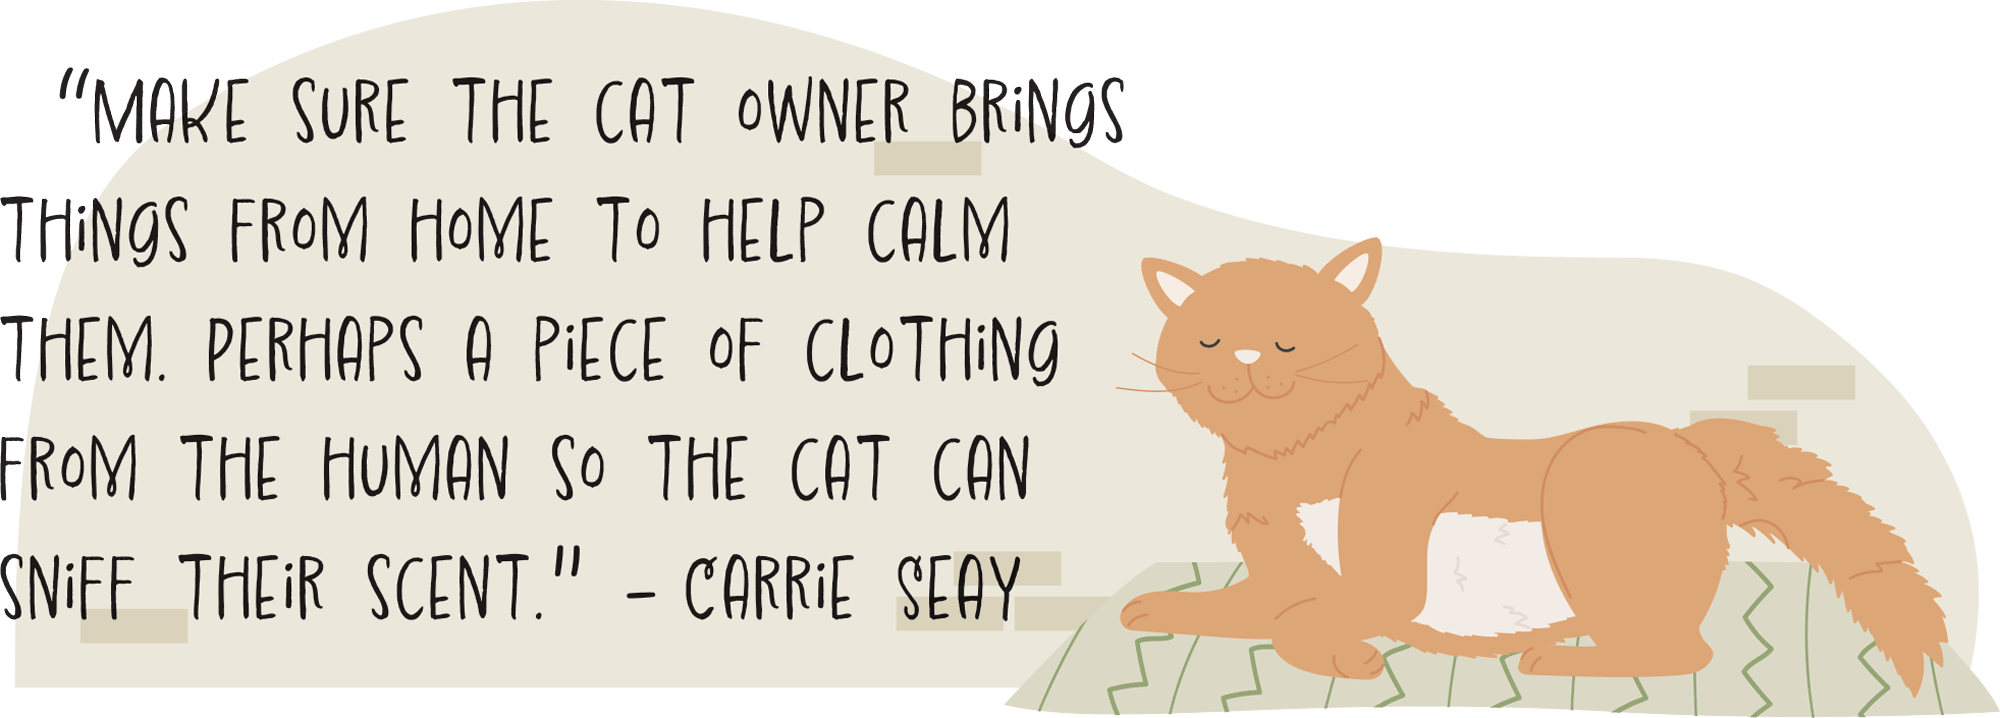 “Make sure the cat owner brings things from home to help calm them. Perhaps a piece of clothing from the human so the cat can sniff their scent." - Carrie Seay